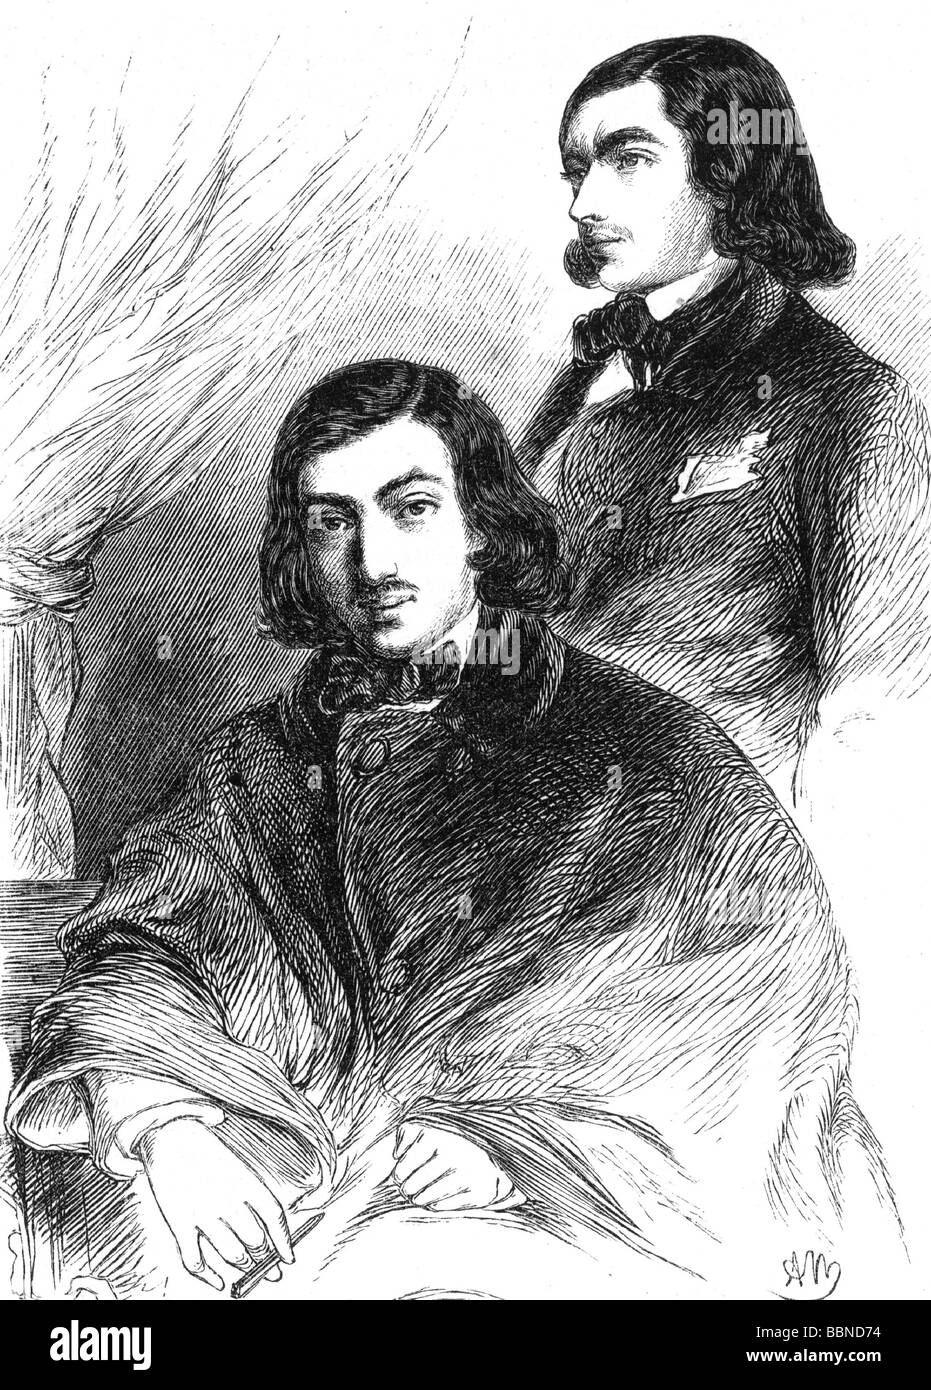 Wieniawski, Henryk, 10.7.1835 - 31.3.1880, Polish composer, violinist, half length, with his brother Joseph, wood engraving, published in 1854, , Stock Photo